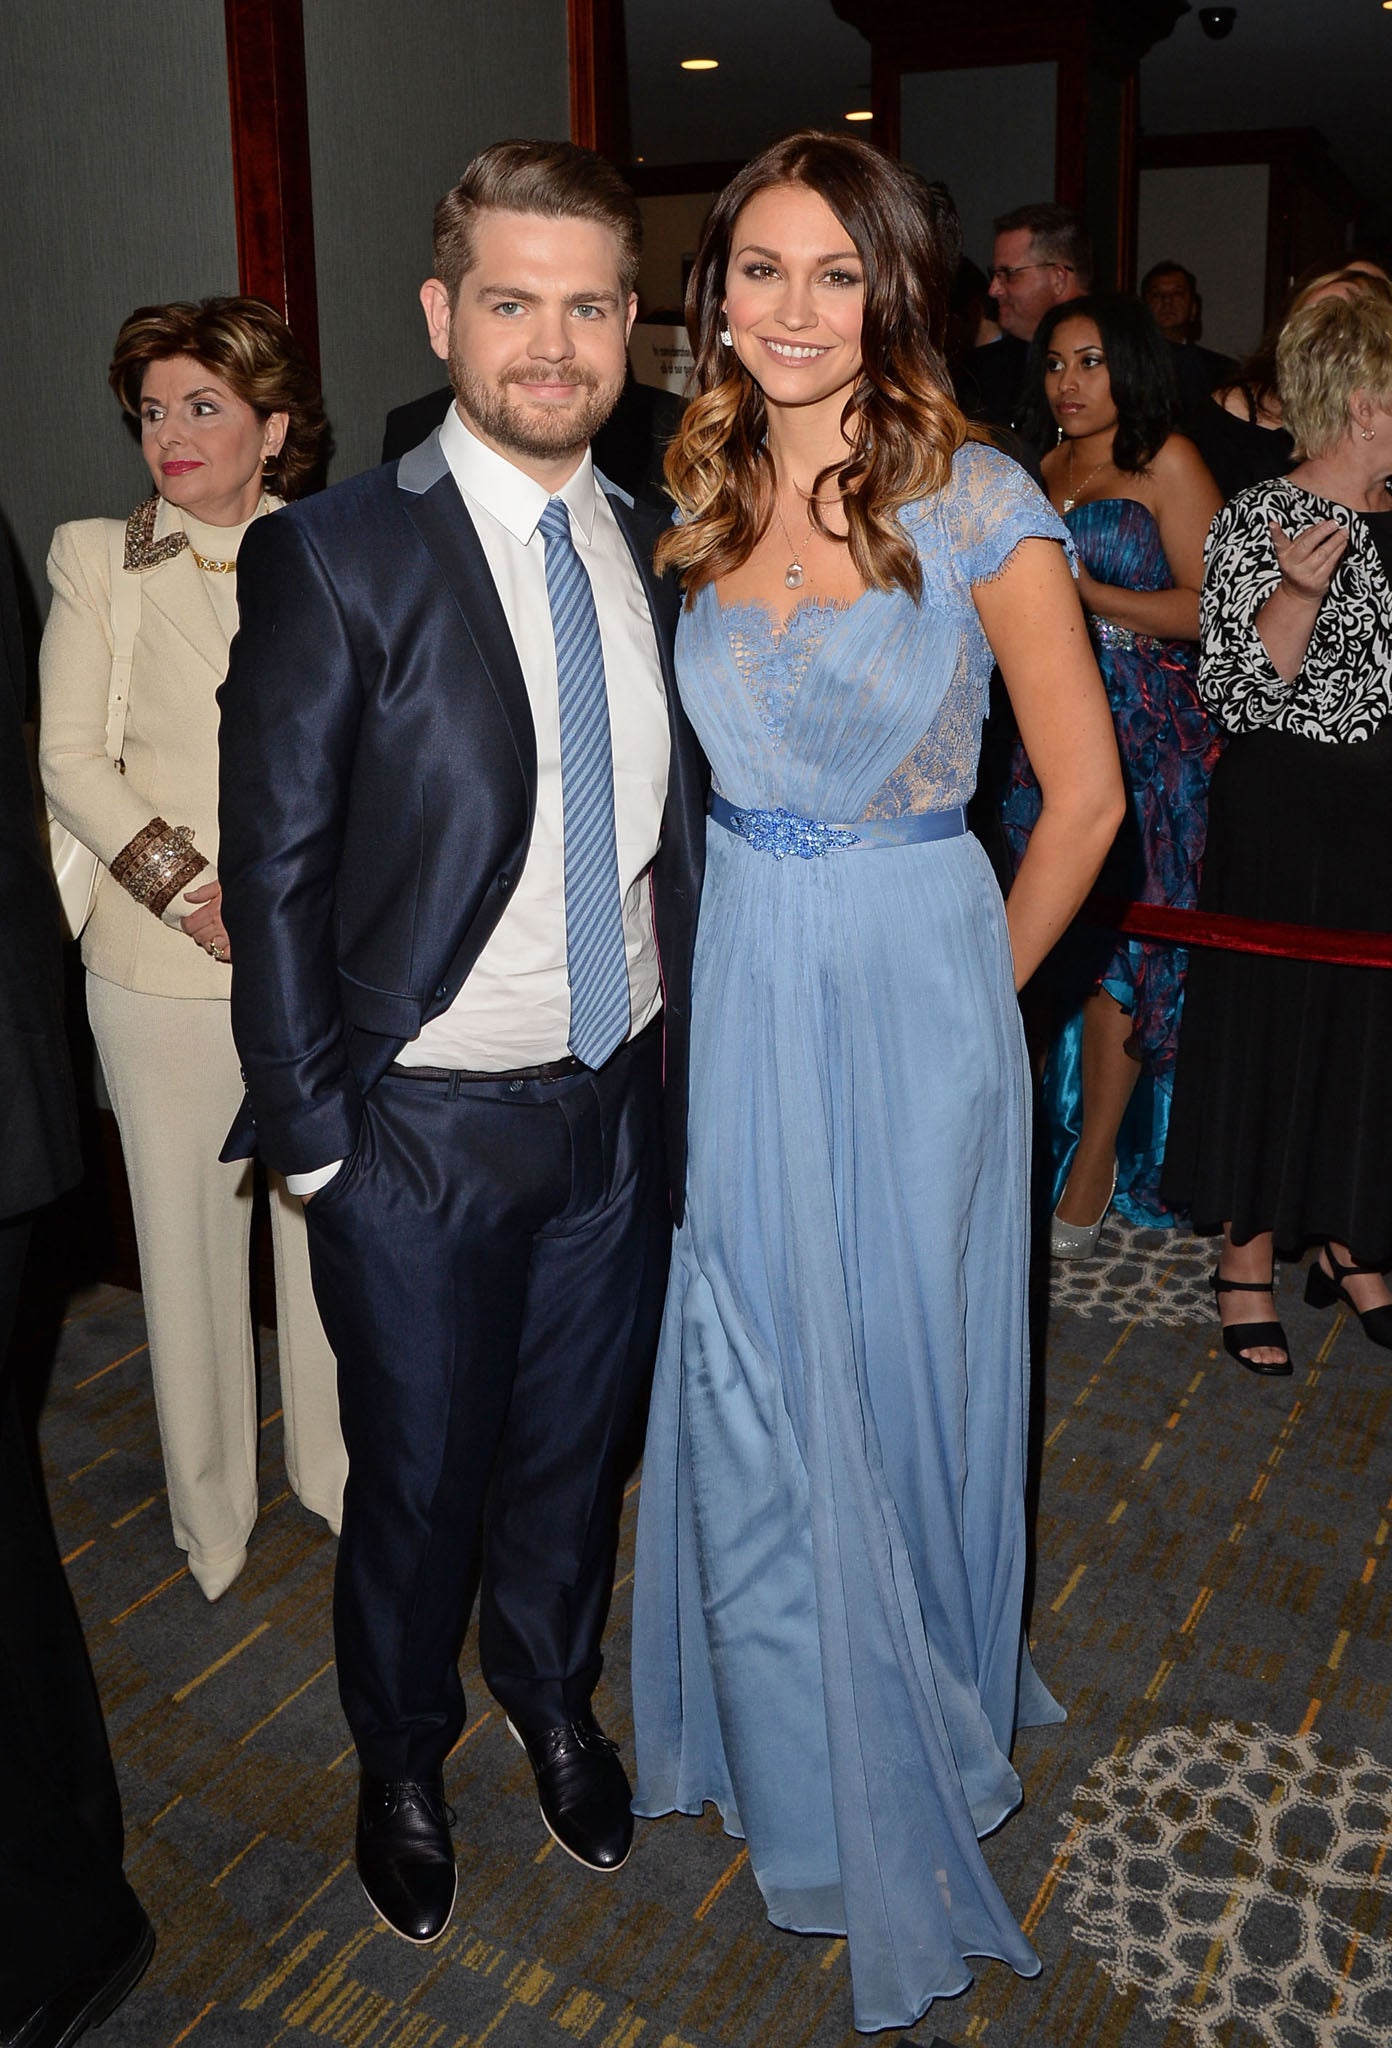 Jack Osbourne and his wife Lisa Stelly pictured in May: The couple have announced they suffered a 'late-term miscarriage' last week.